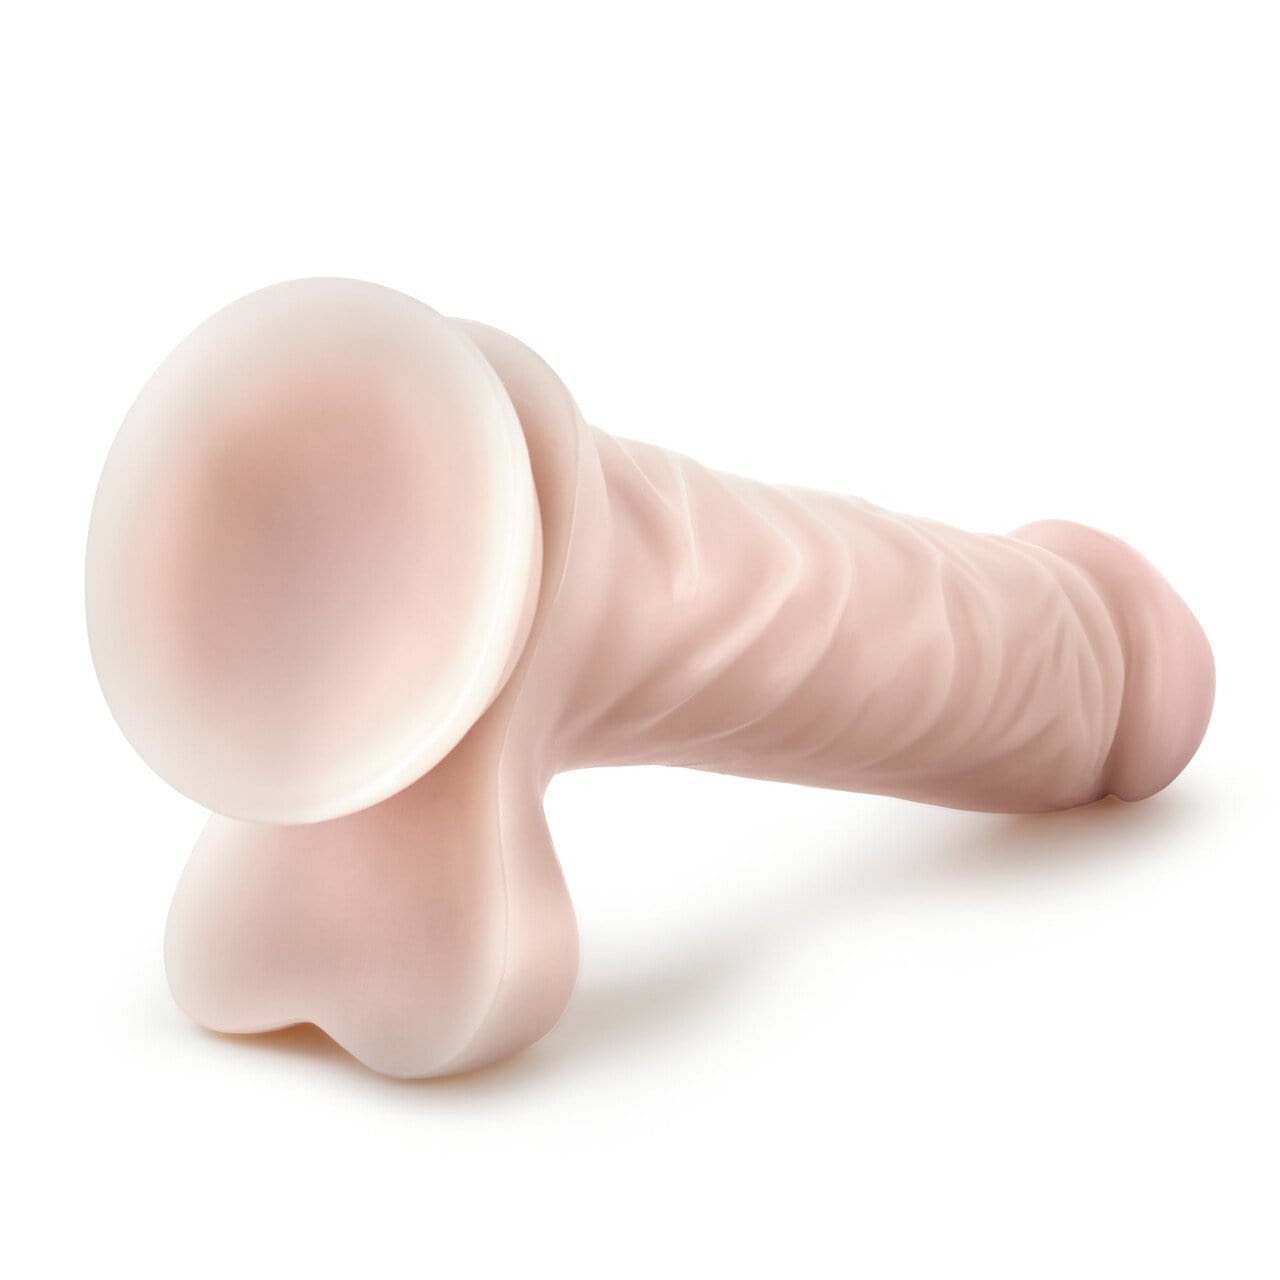 Dr. Skin Cock 1 9 Inch Dildo - Beige - Thorn & Feather